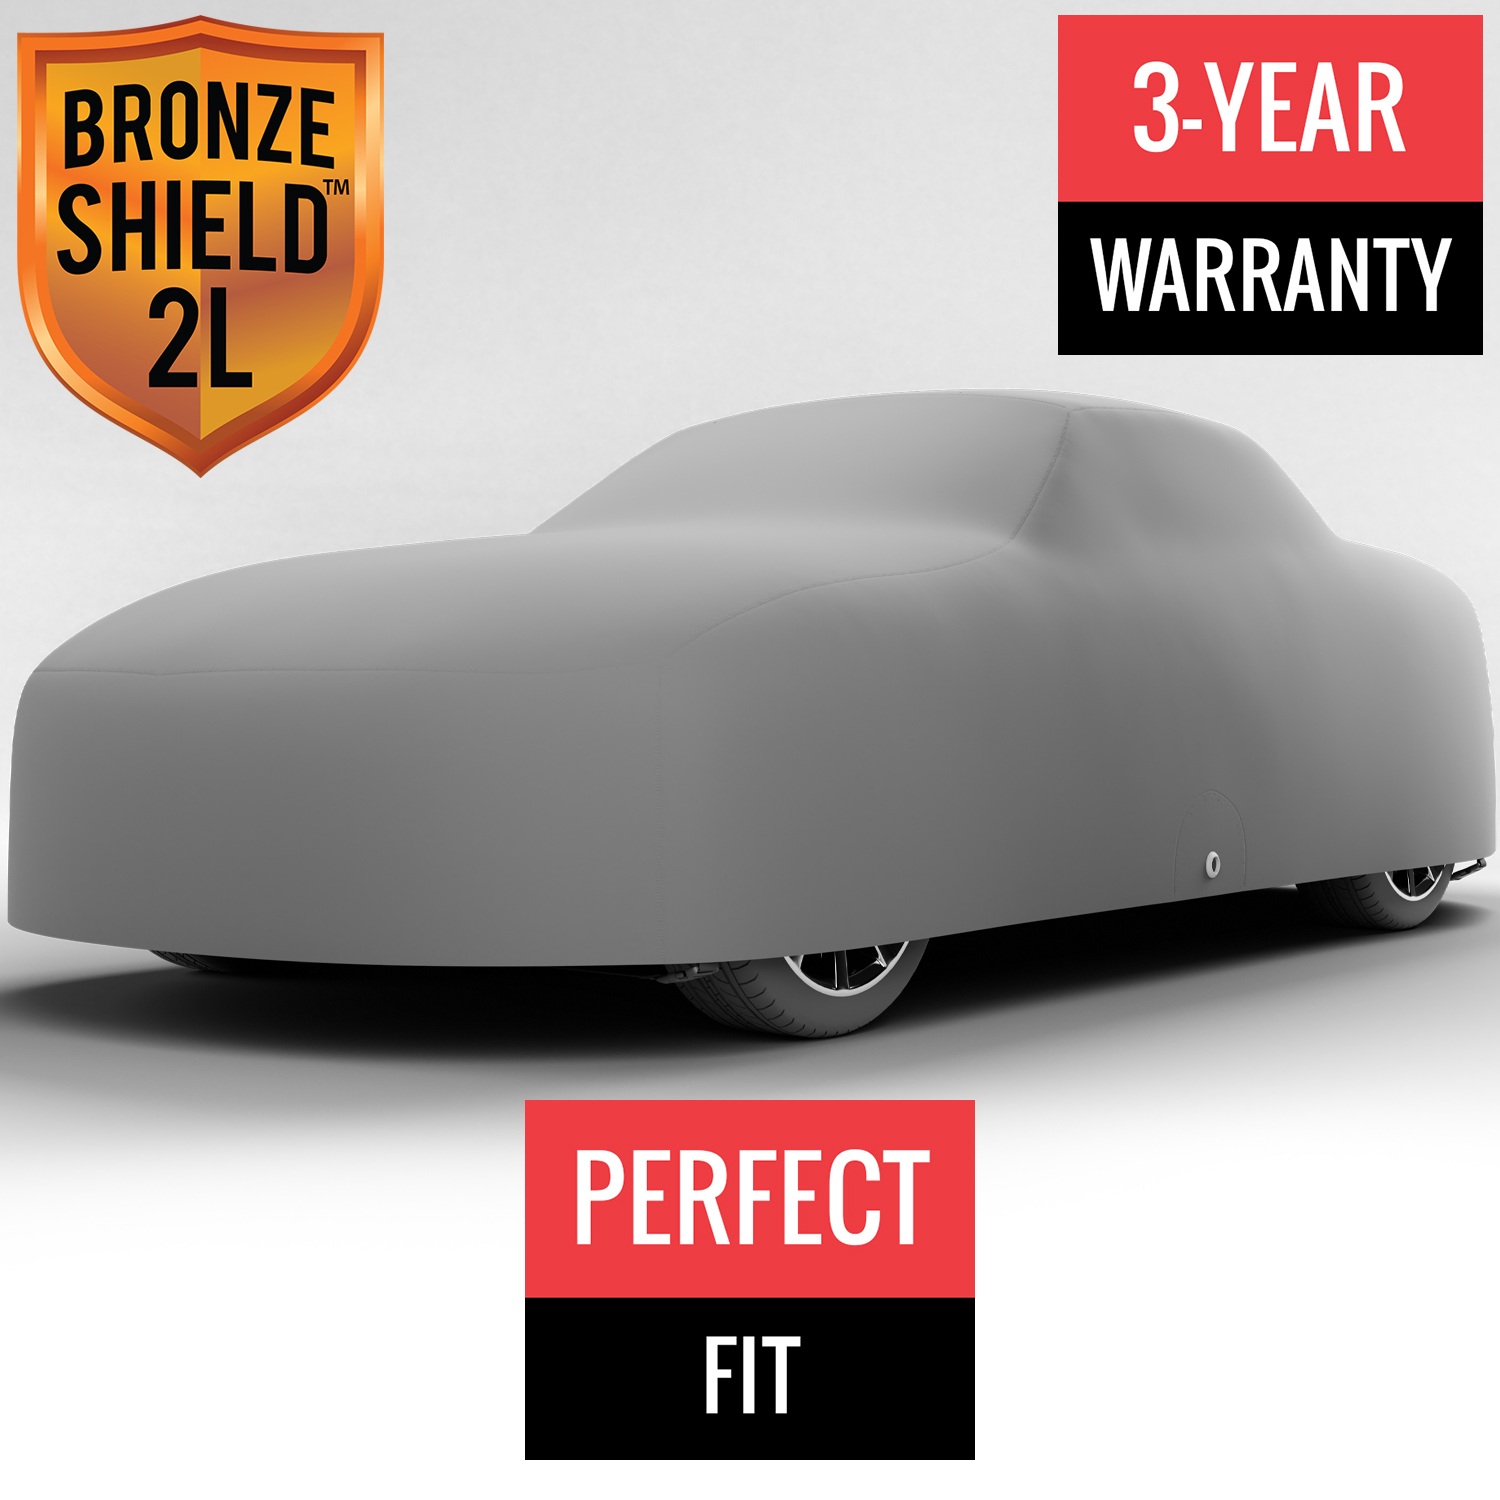 Bronze Shield 2L - Car Cover for Scion FR-S 2015 Coupe 2-Door